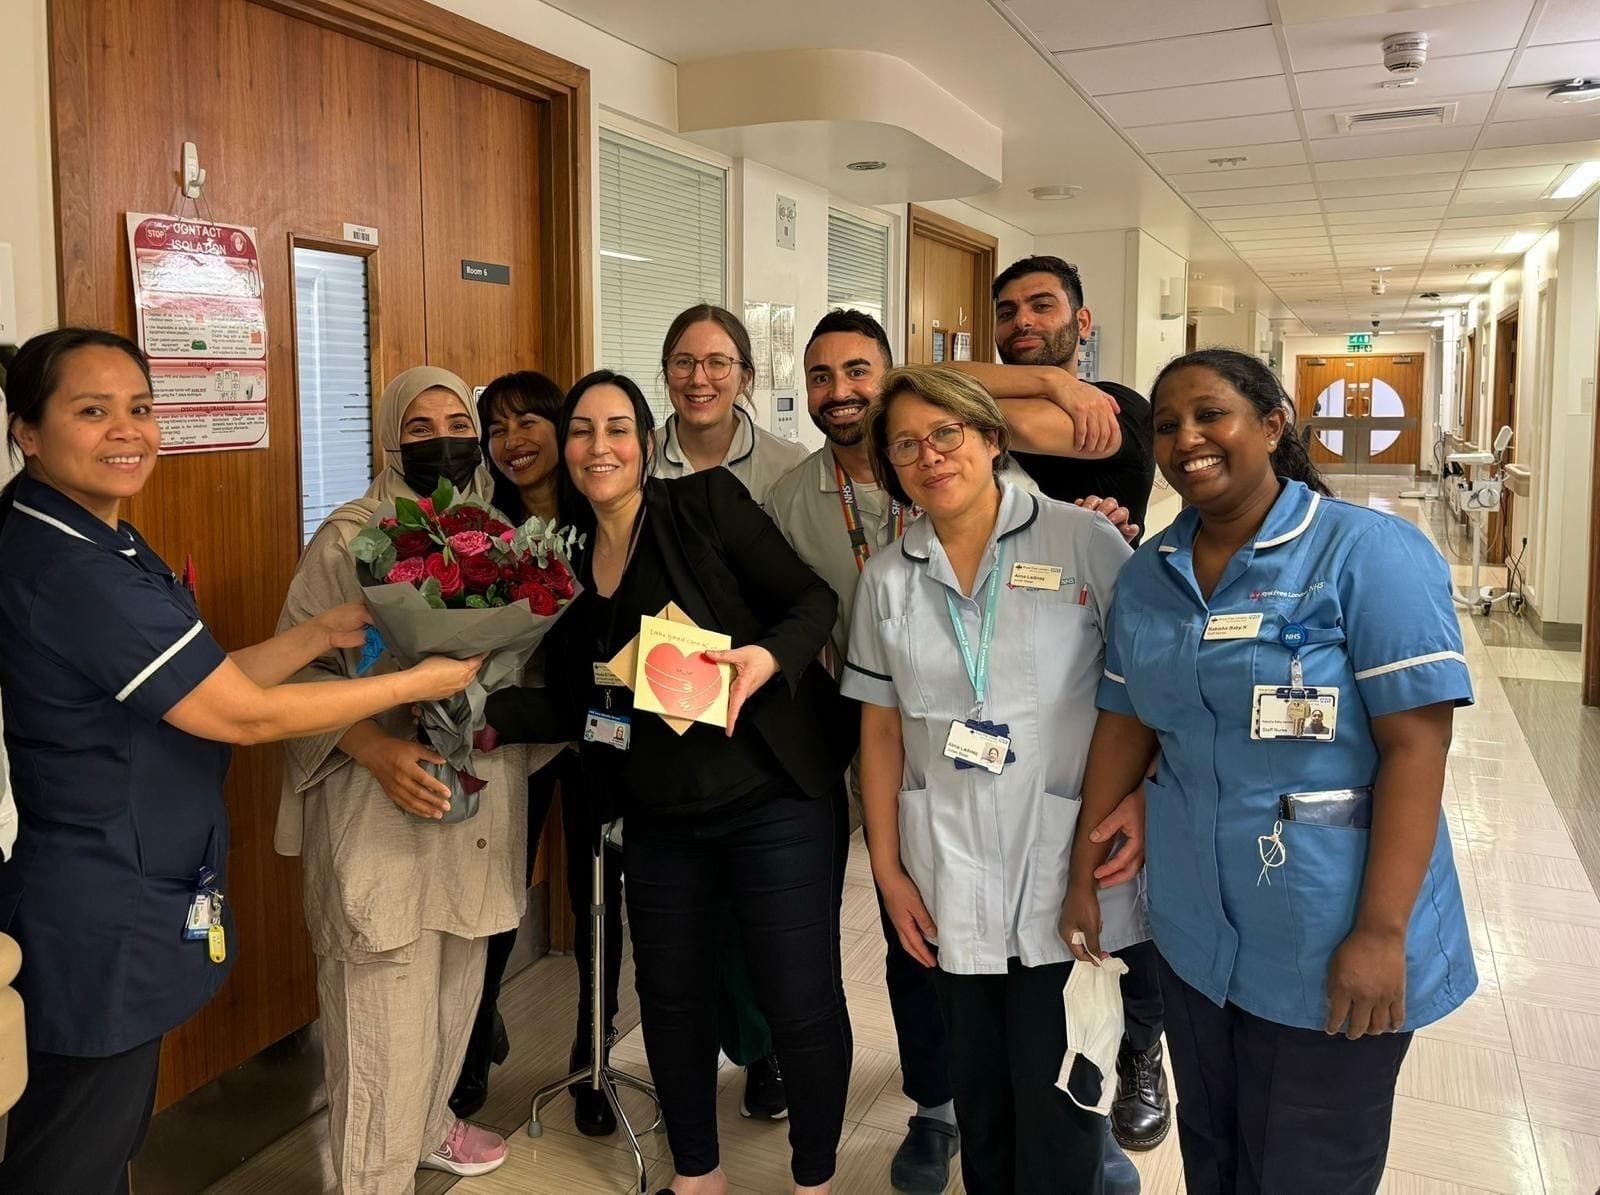 Our international & nursing team members bid
Mrs Al Thufairi farewell with a beautiful bouquet of
flowers and a card holding their sincere wishes of a
continued recovery.